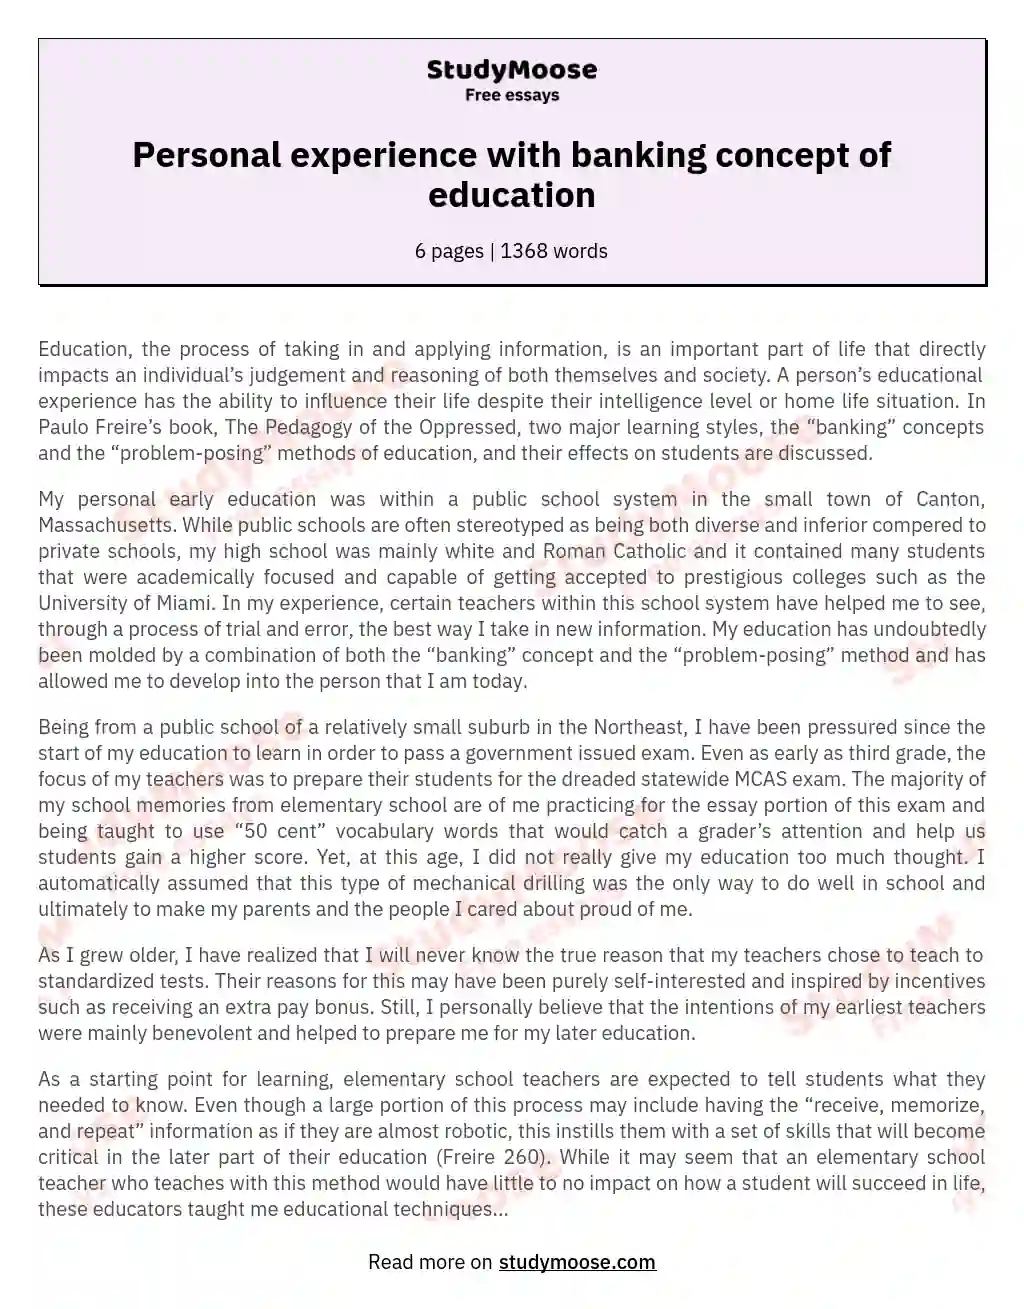 Personal experience with banking concept of education essay